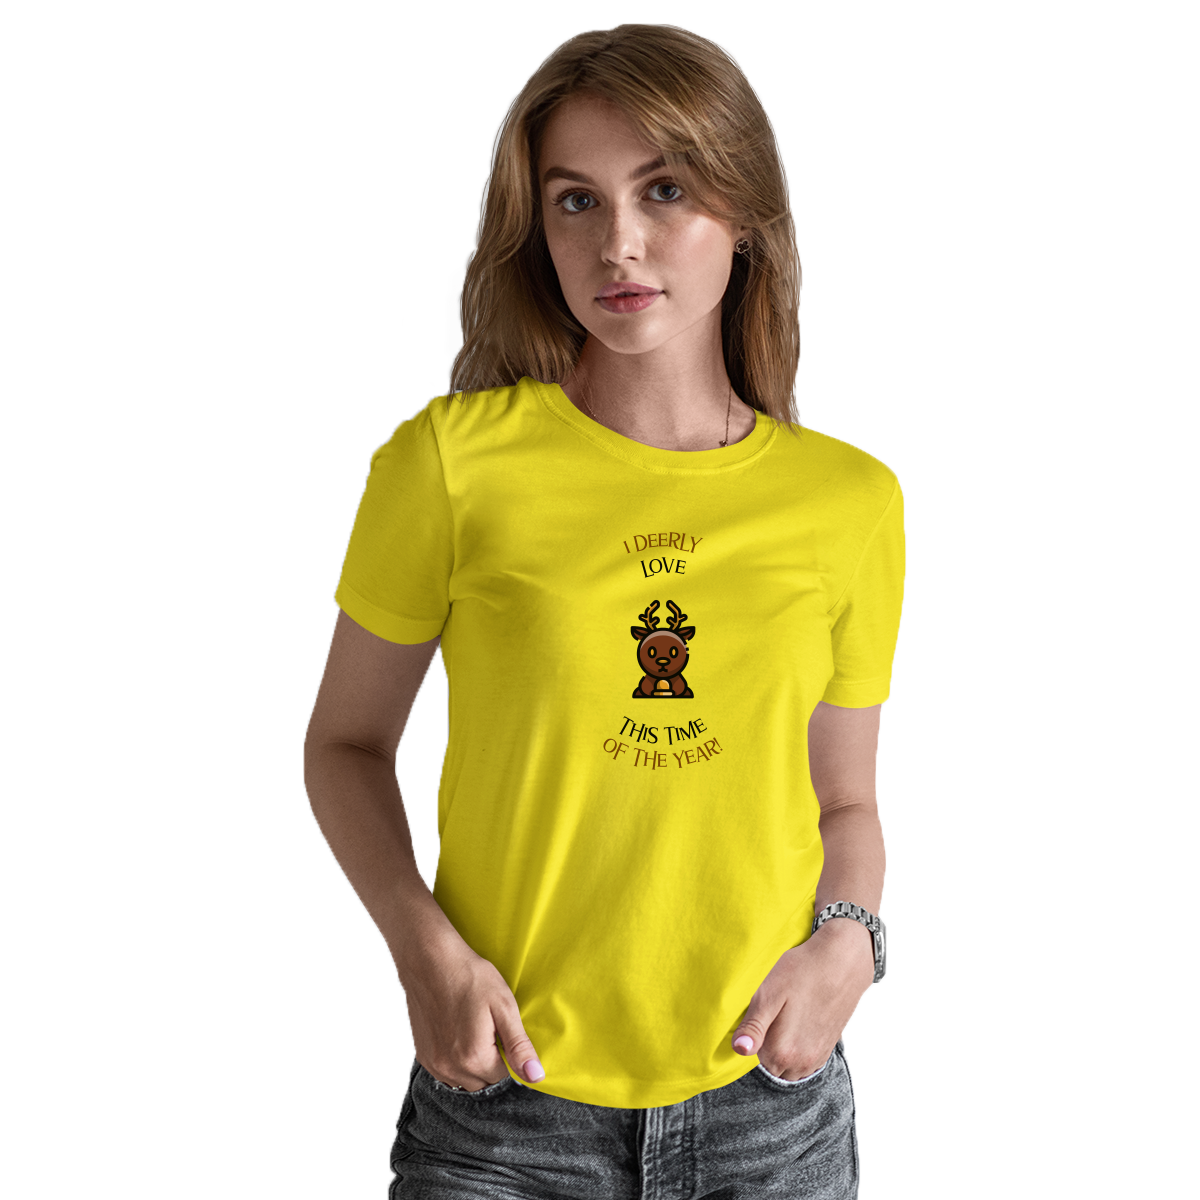 I Deerly Love This Time of the Year! Women's T-shirt | Yellow